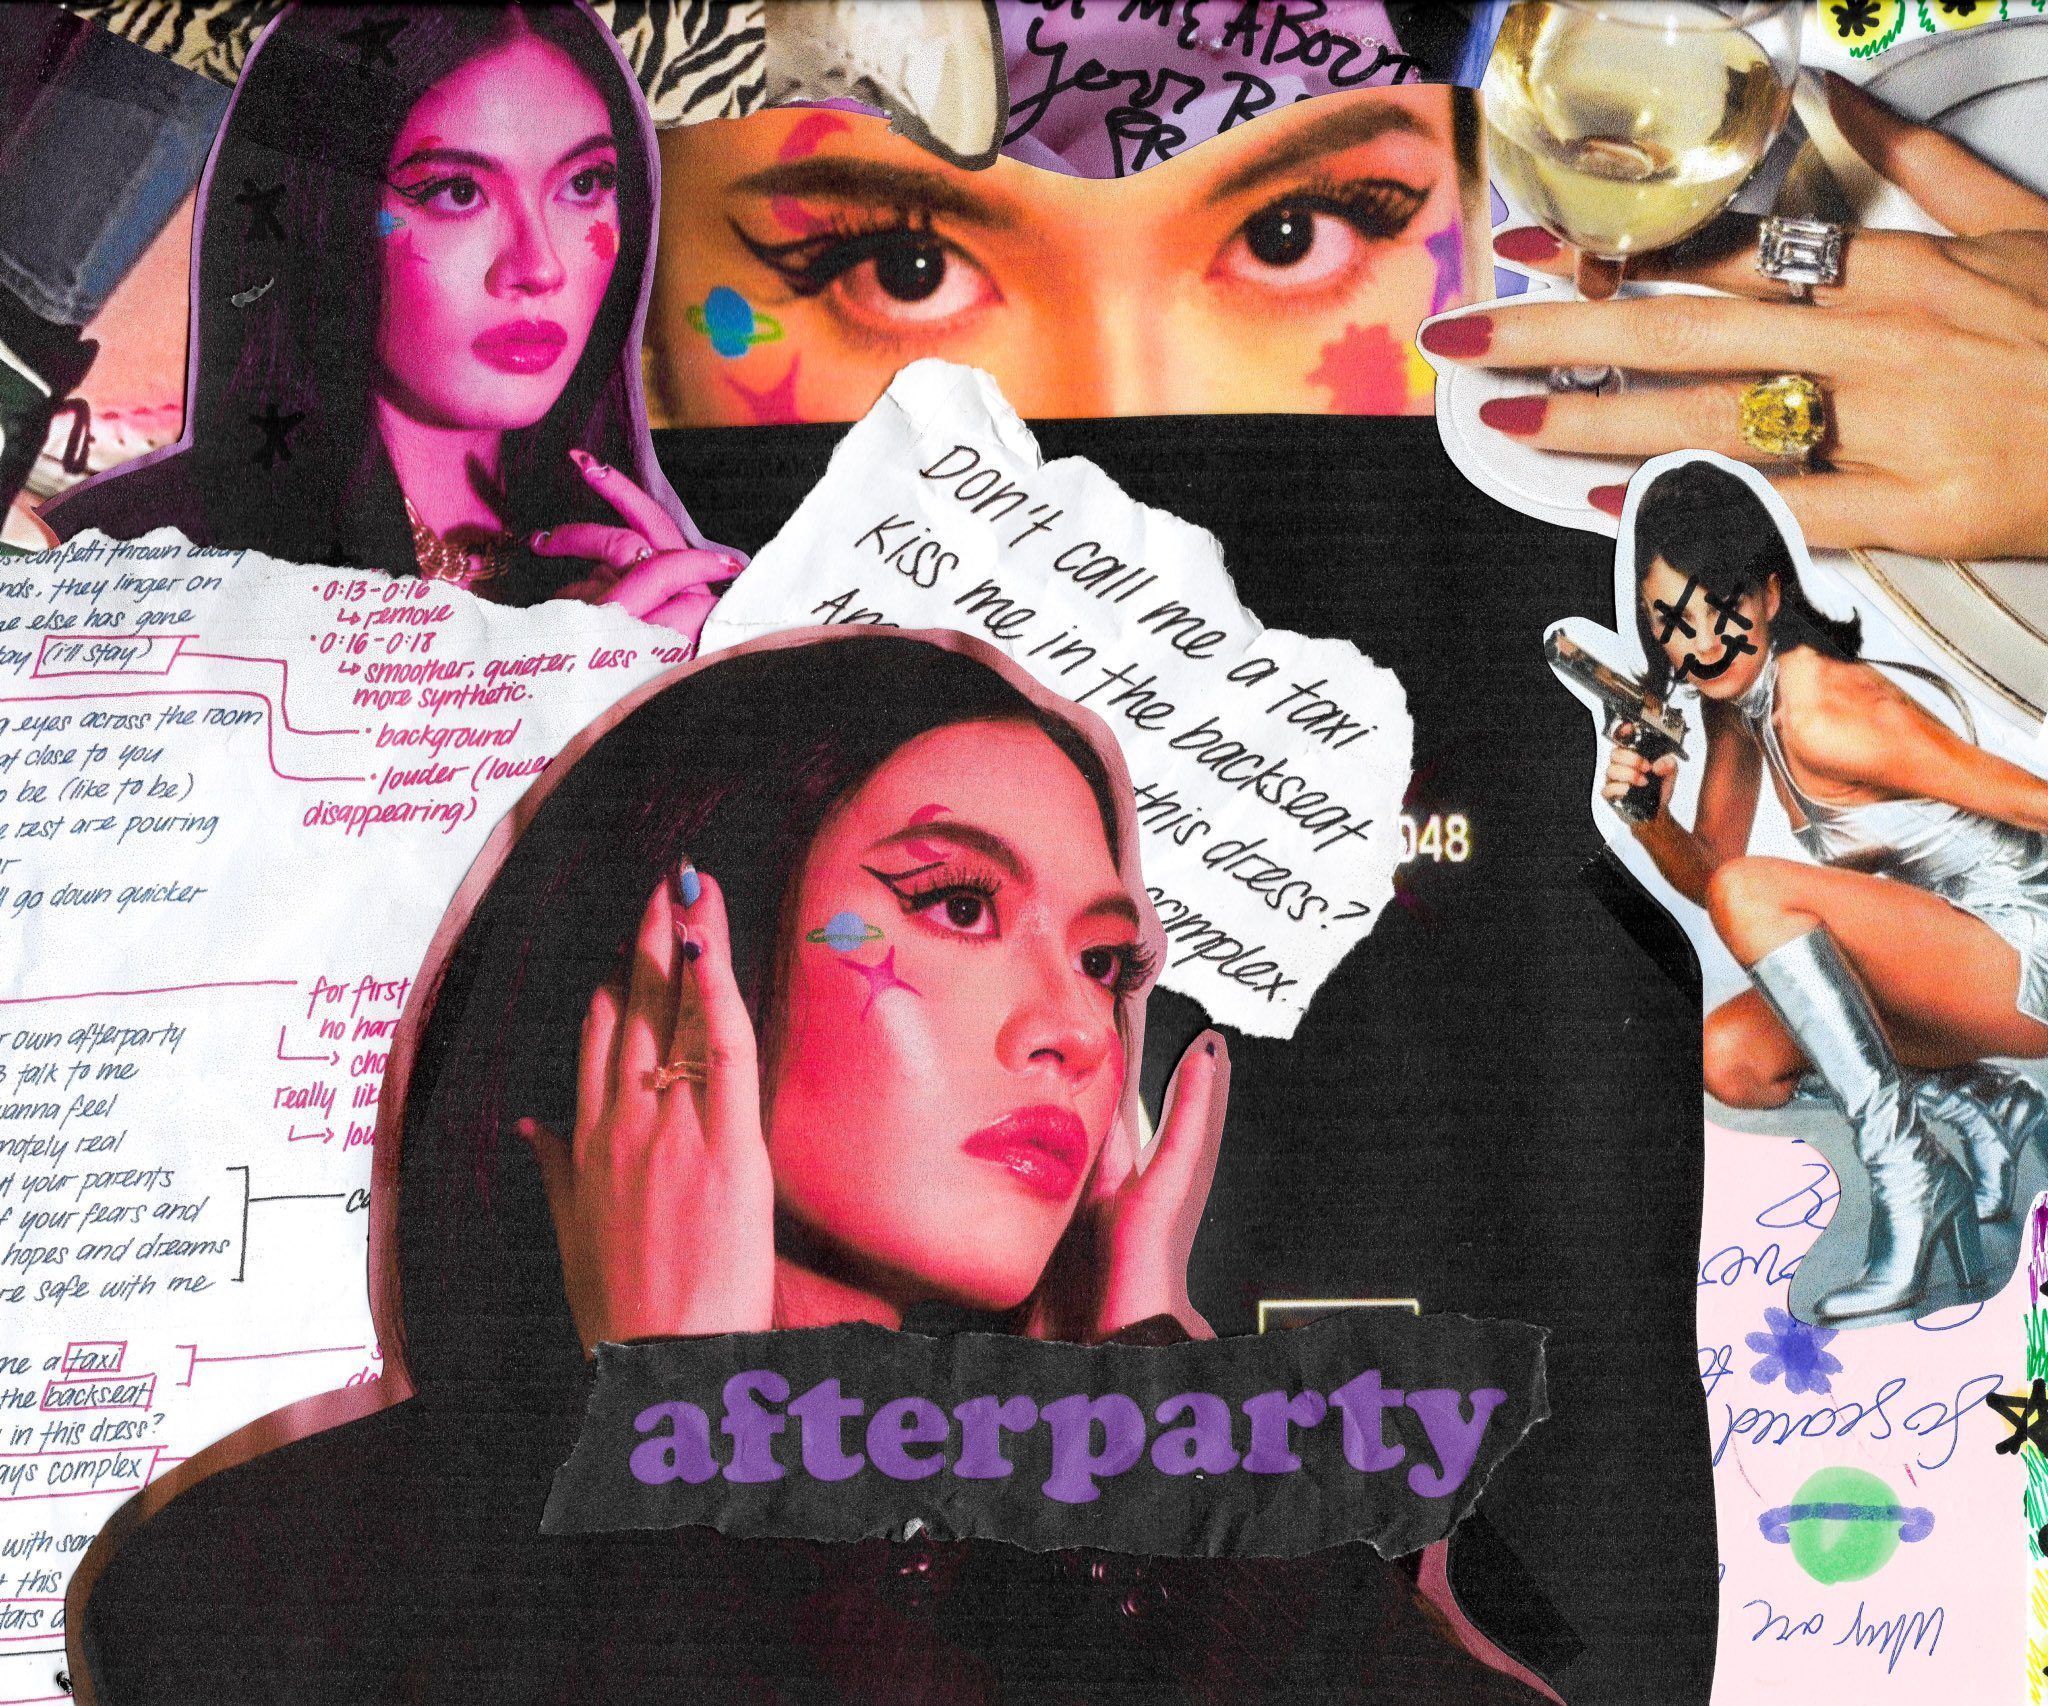 LISTEN: Kakie Pangilinan ends 2020 with new song, 'afterparty'. - Cardi B